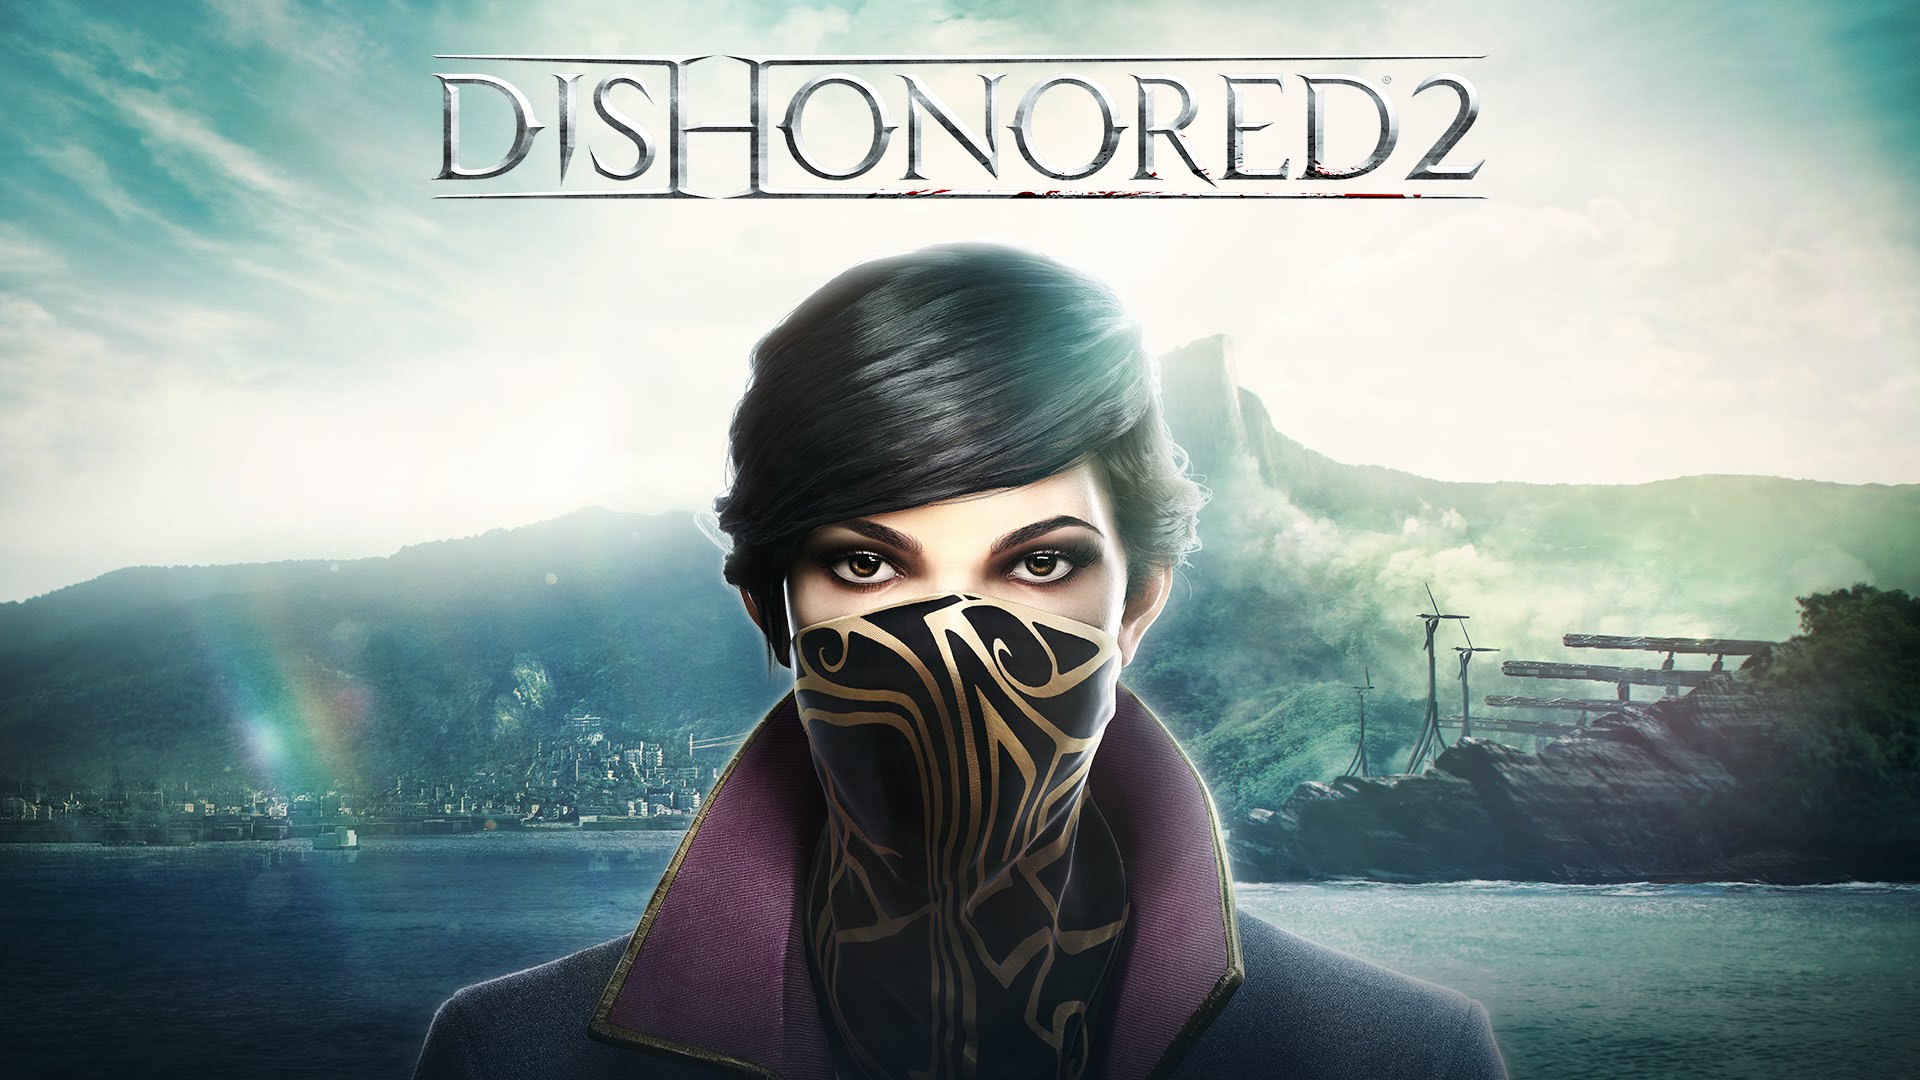 Dishonored 2 – Official E3 Gameplay Trailer